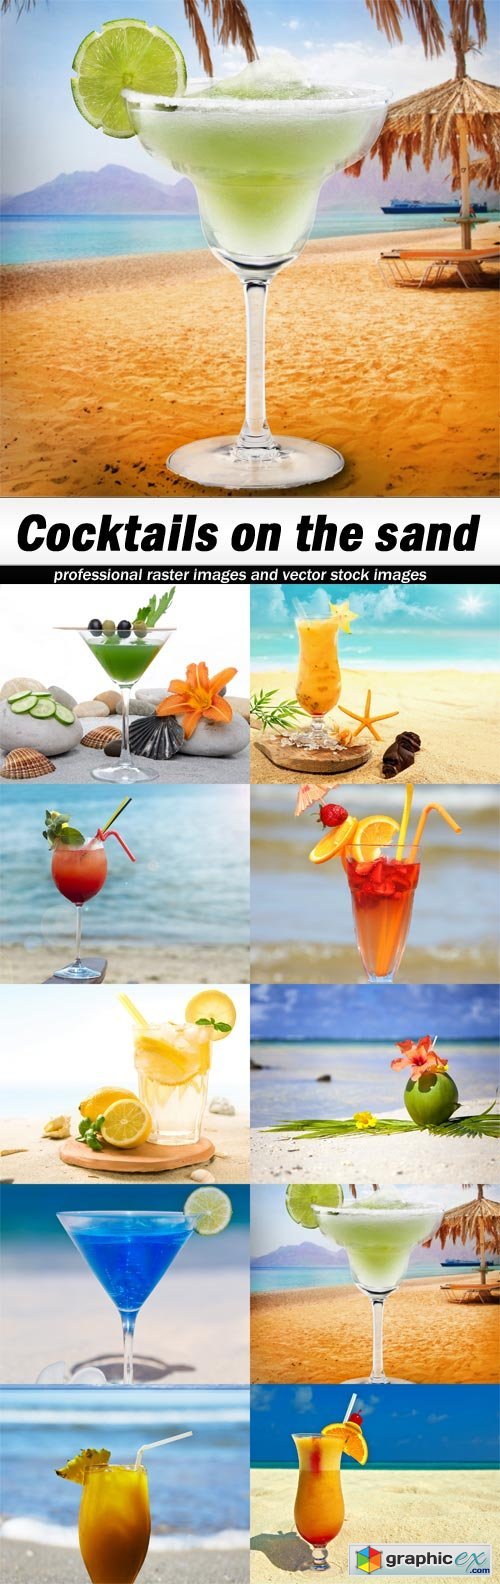 Cocktails on the sand